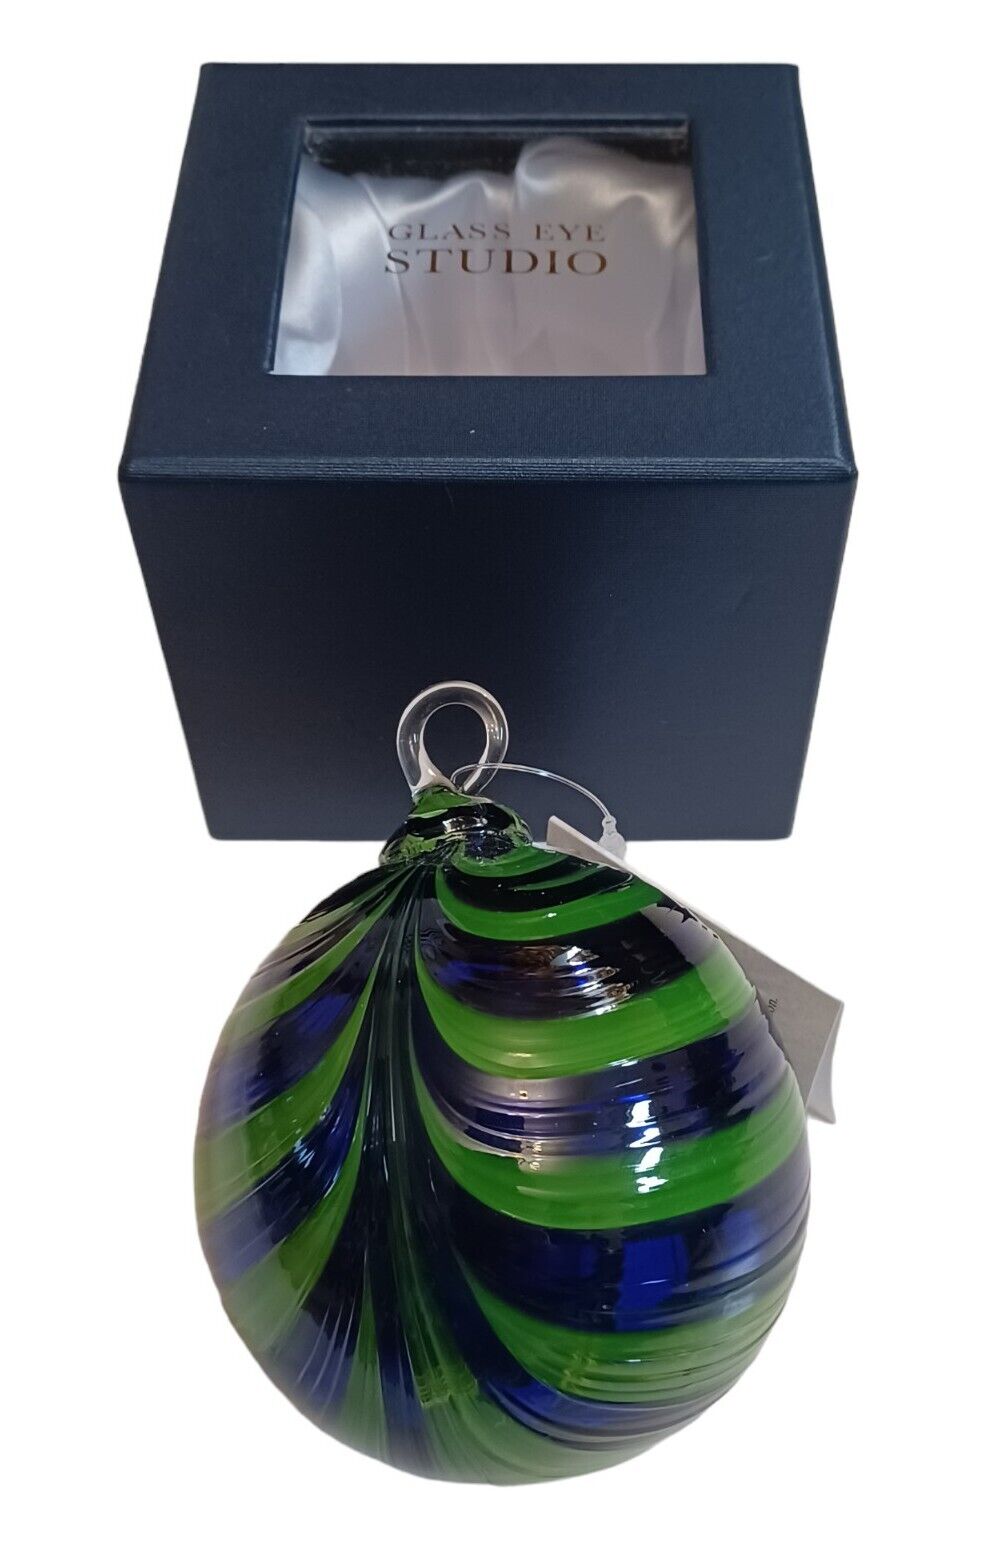 Glass Eye Studio GES Christmas Ornament in Box Green Blue Seahawks Colors NWT